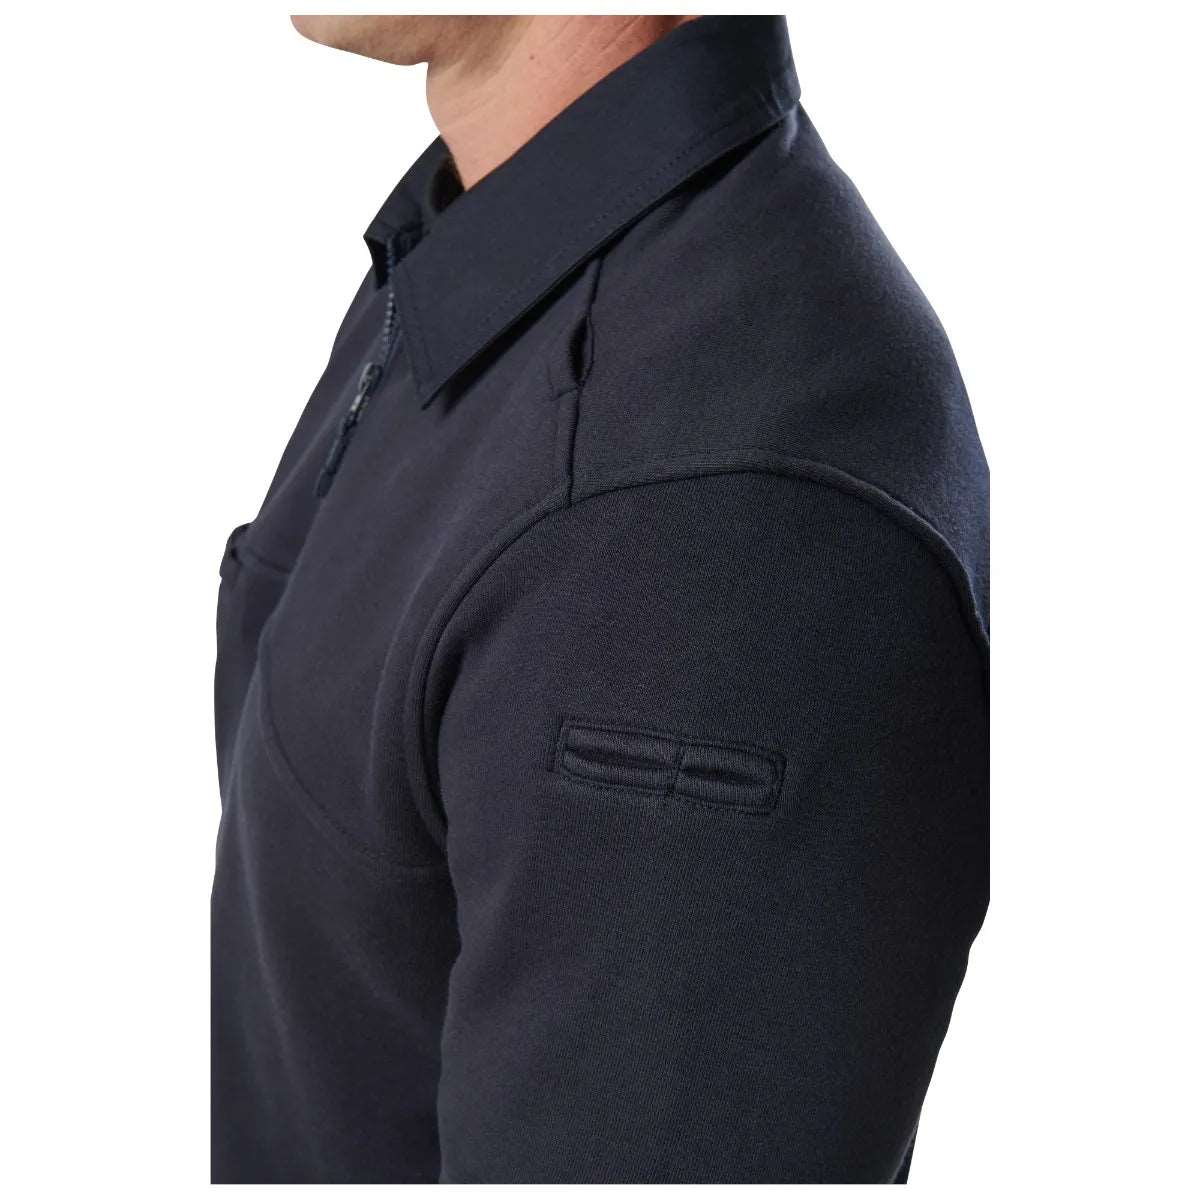 Outerwear - 5.11 Tactical Job Shirt With Canvas 2.0